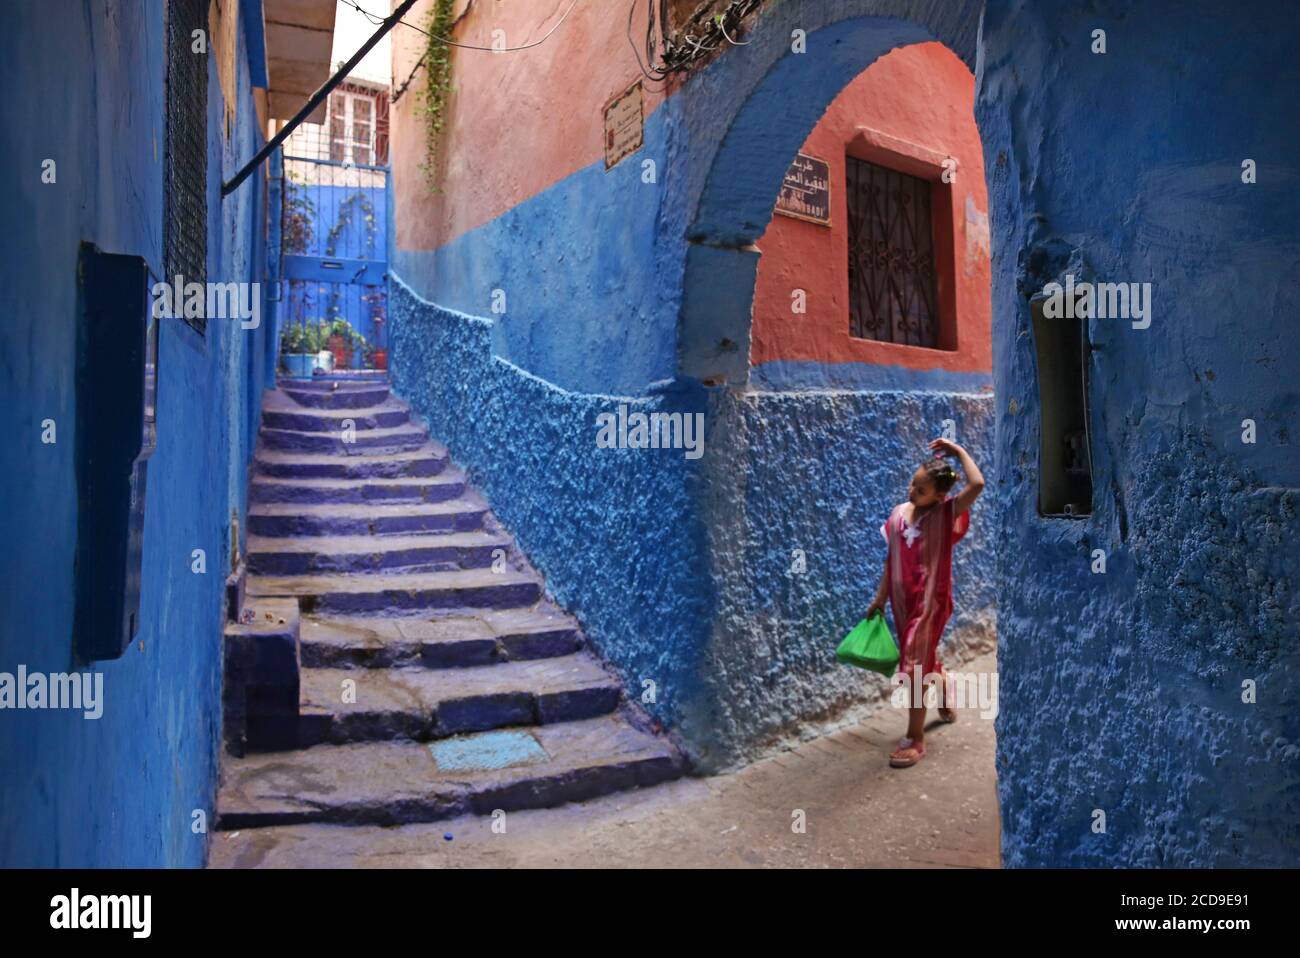 Morocco, Tangier Tetouan region, Tangier, Moroccan girl in an alley of the medina with blue walls Stock Photo